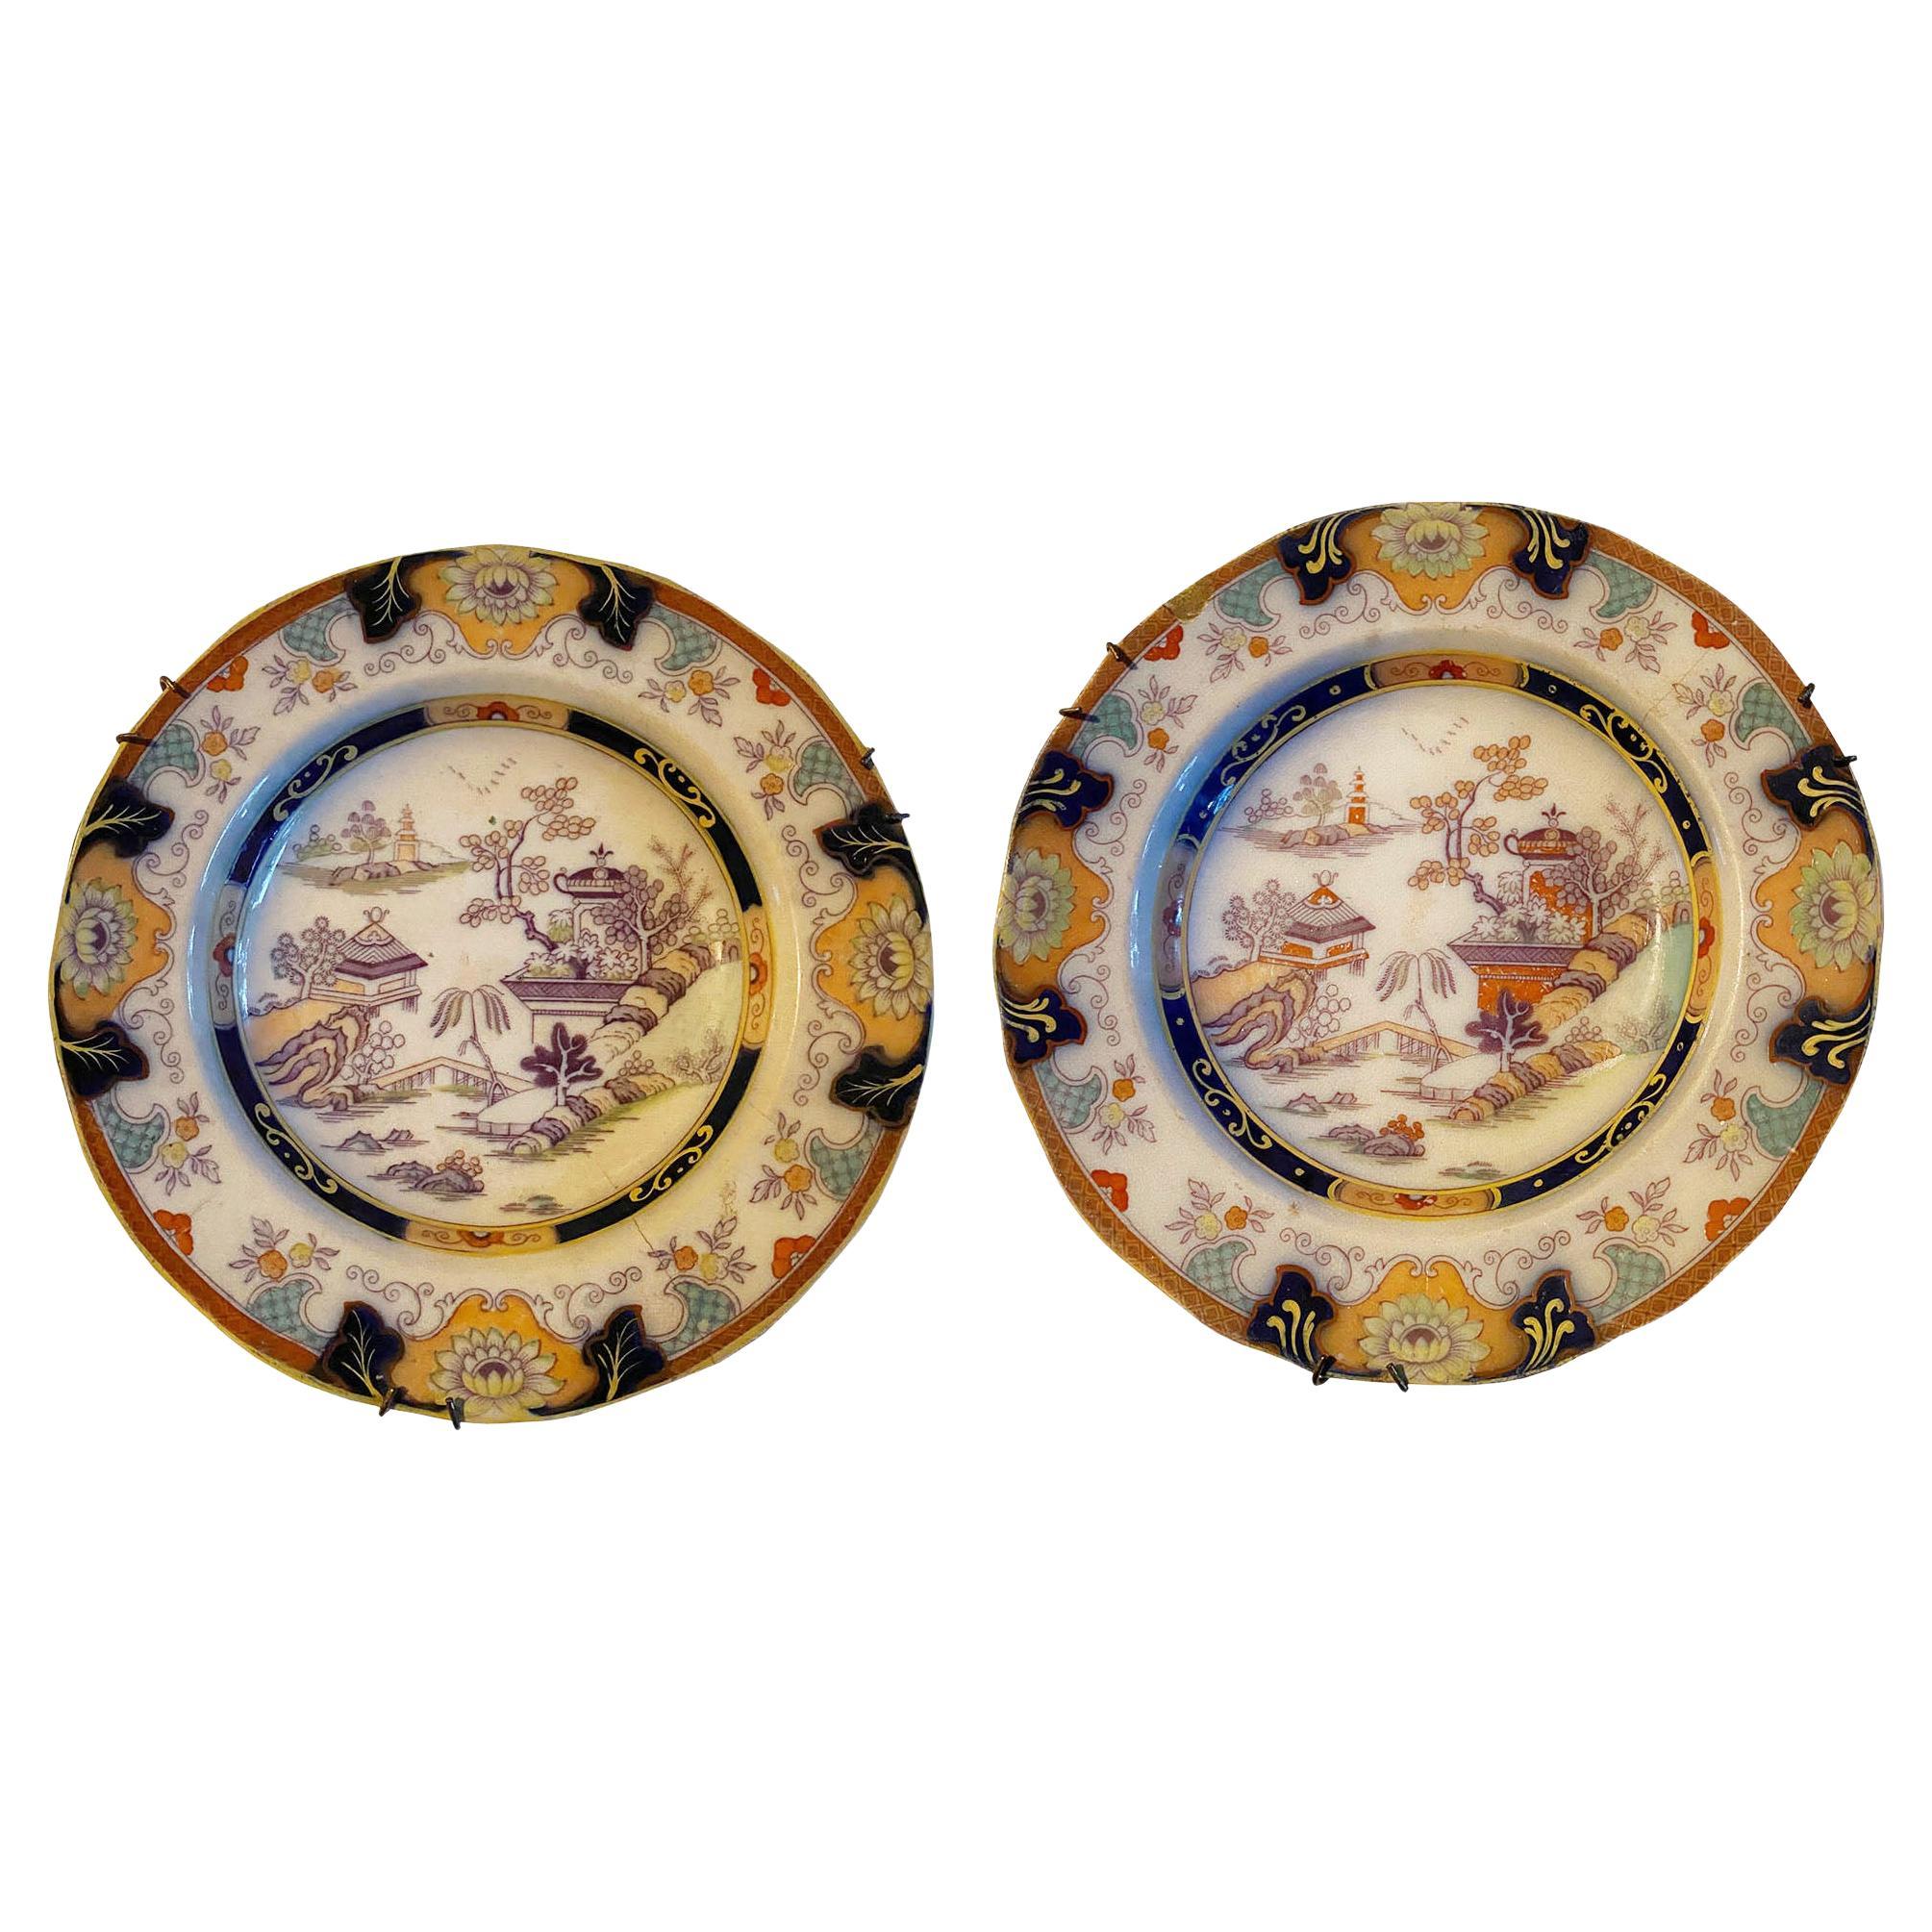 Antique Chinese Polychrome Plates, a Pair